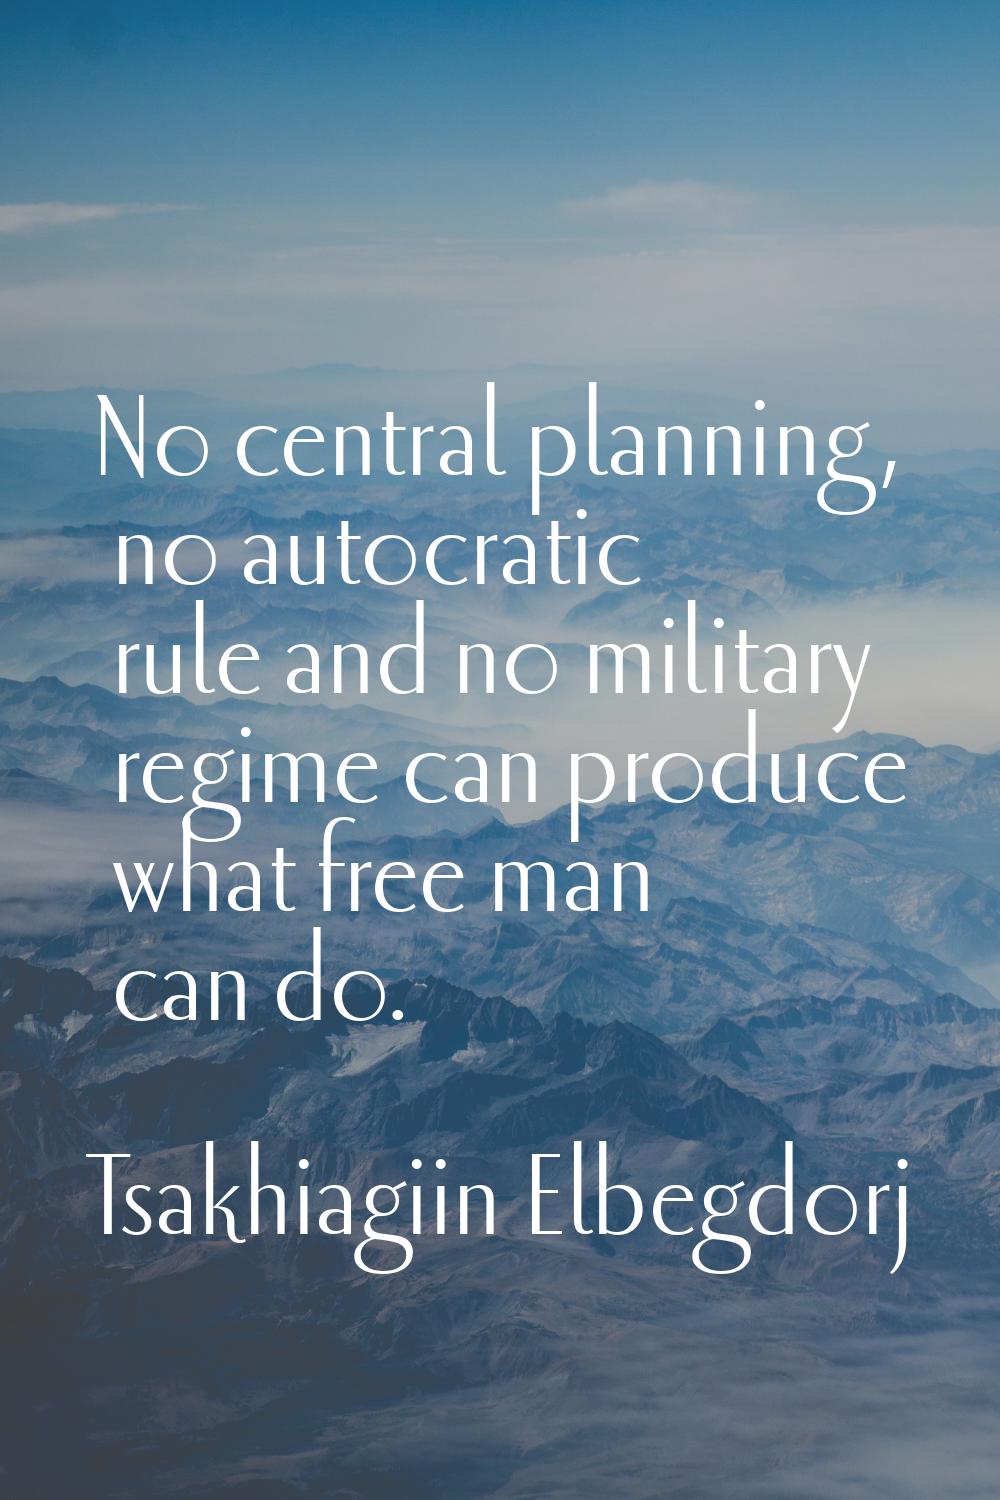 No central planning, no autocratic rule and no military regime can produce what free man can do.